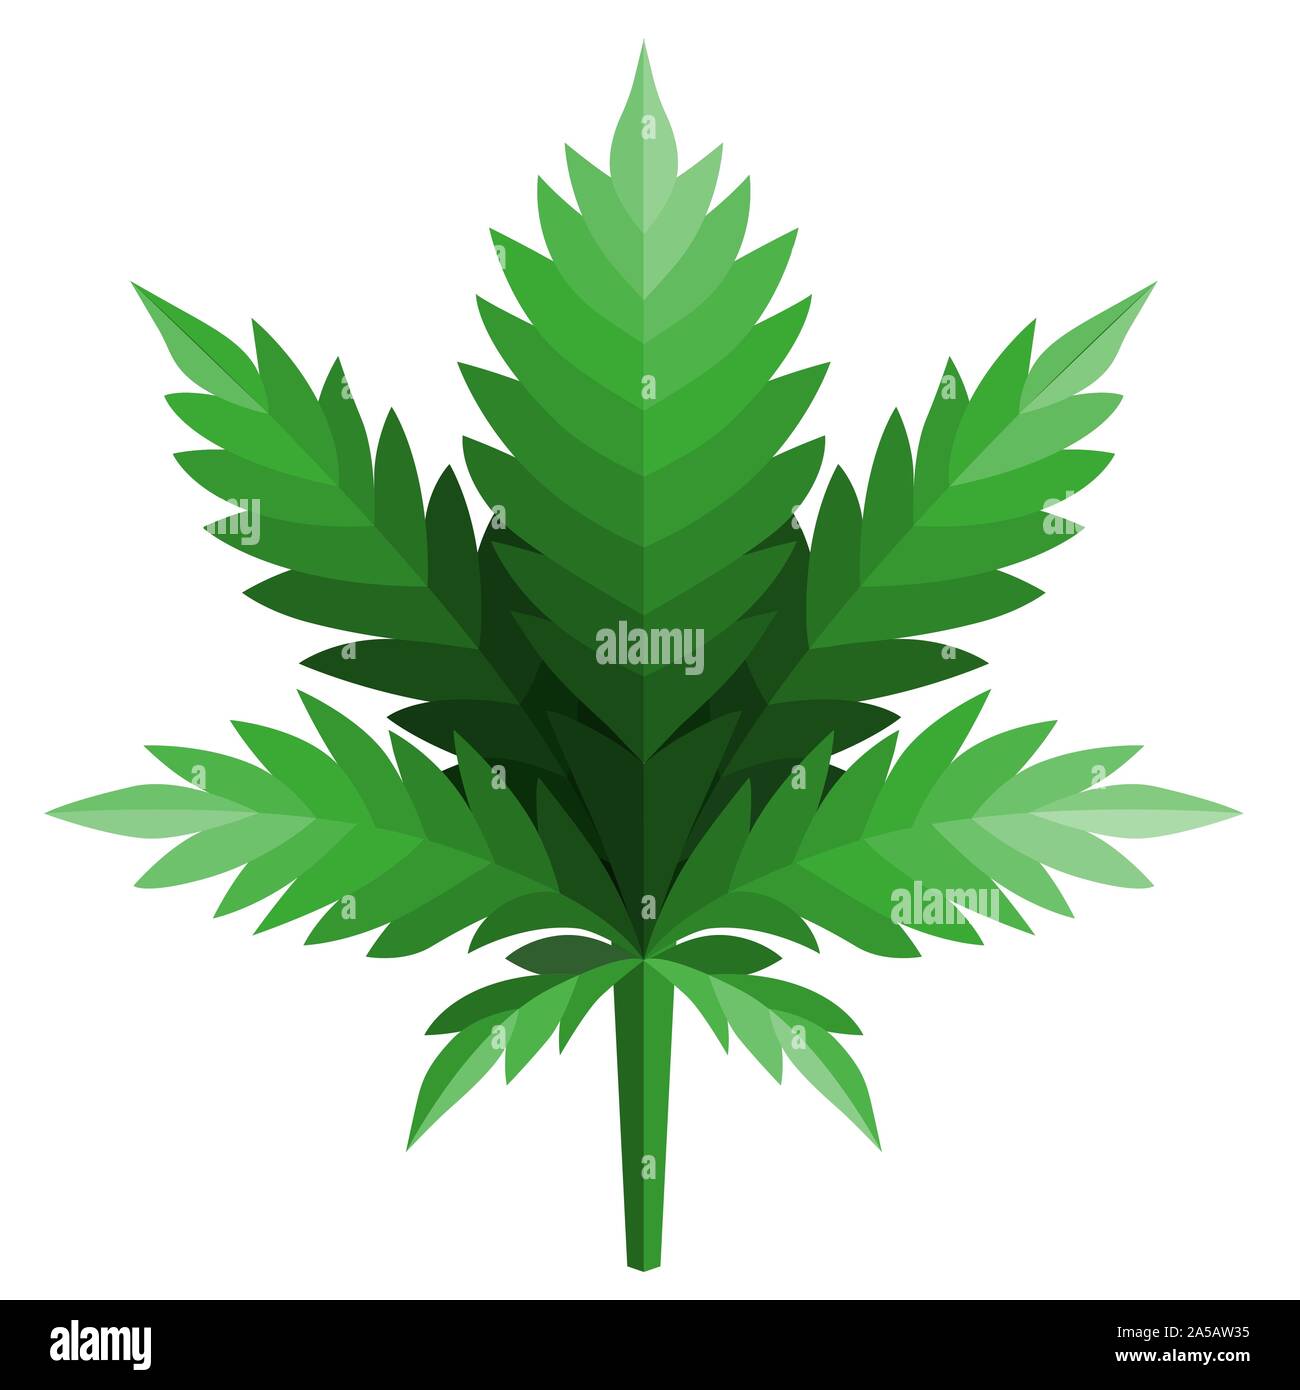 cannabis leaf logo Designs Inspiration Isolated on White Background Stock Vector